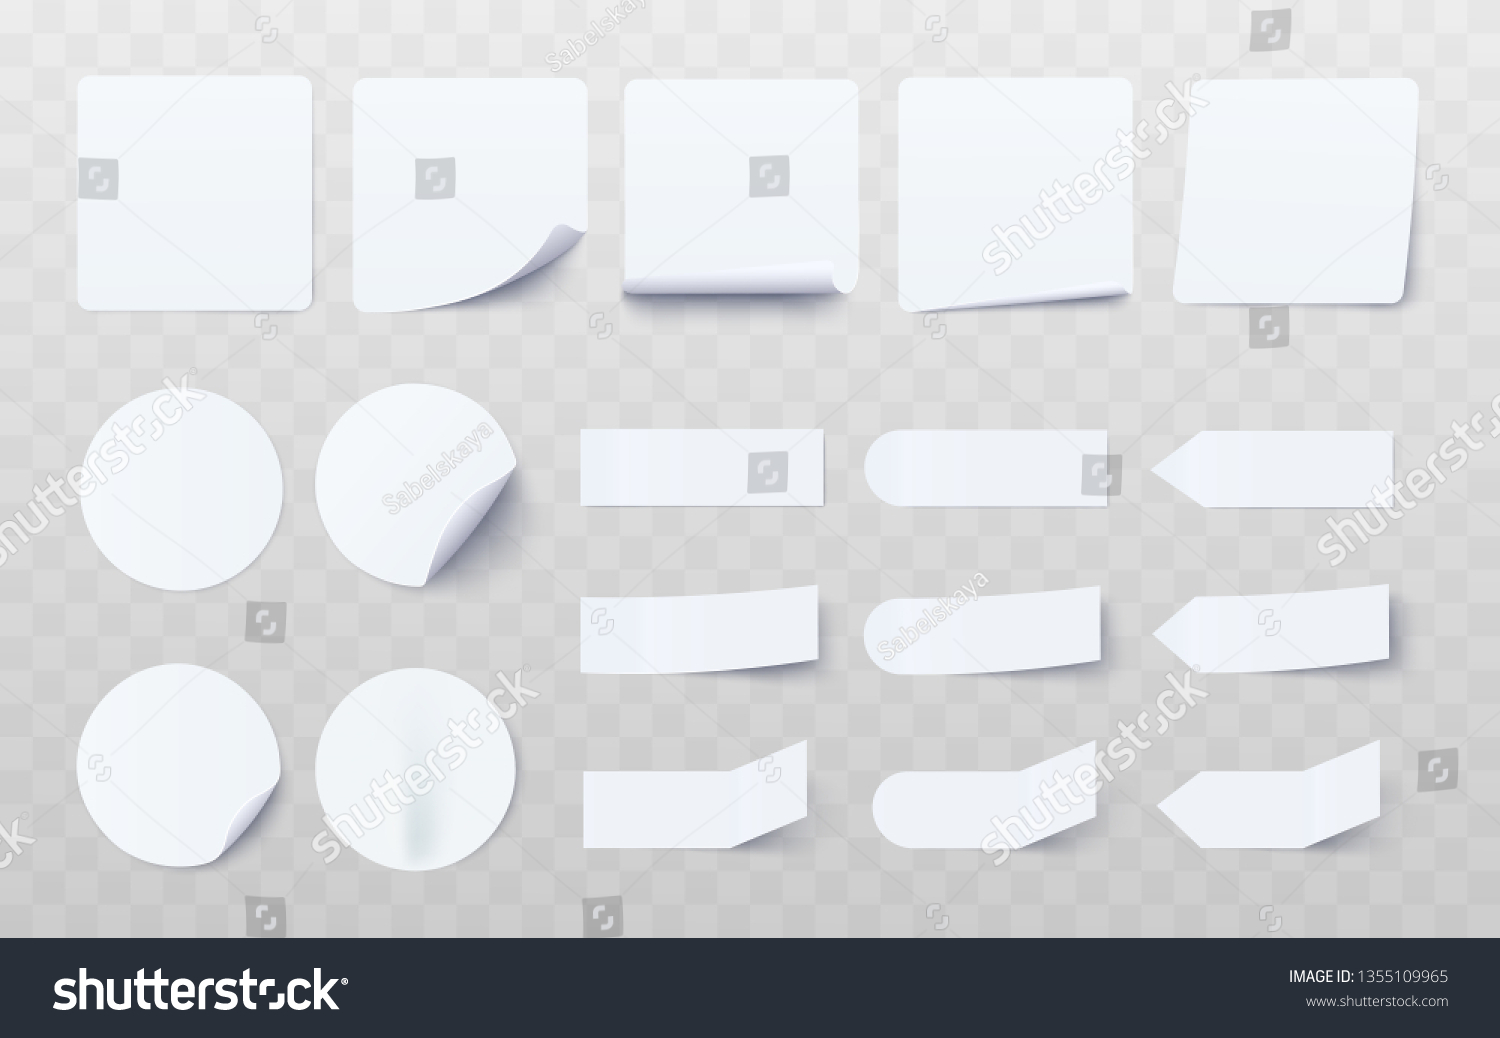 Set of white different shaped stickers and flags realistic style, vector illustration isolated on transparent background. Blank adhesive sheets of adhesive notes paper for labeling information #1355109965